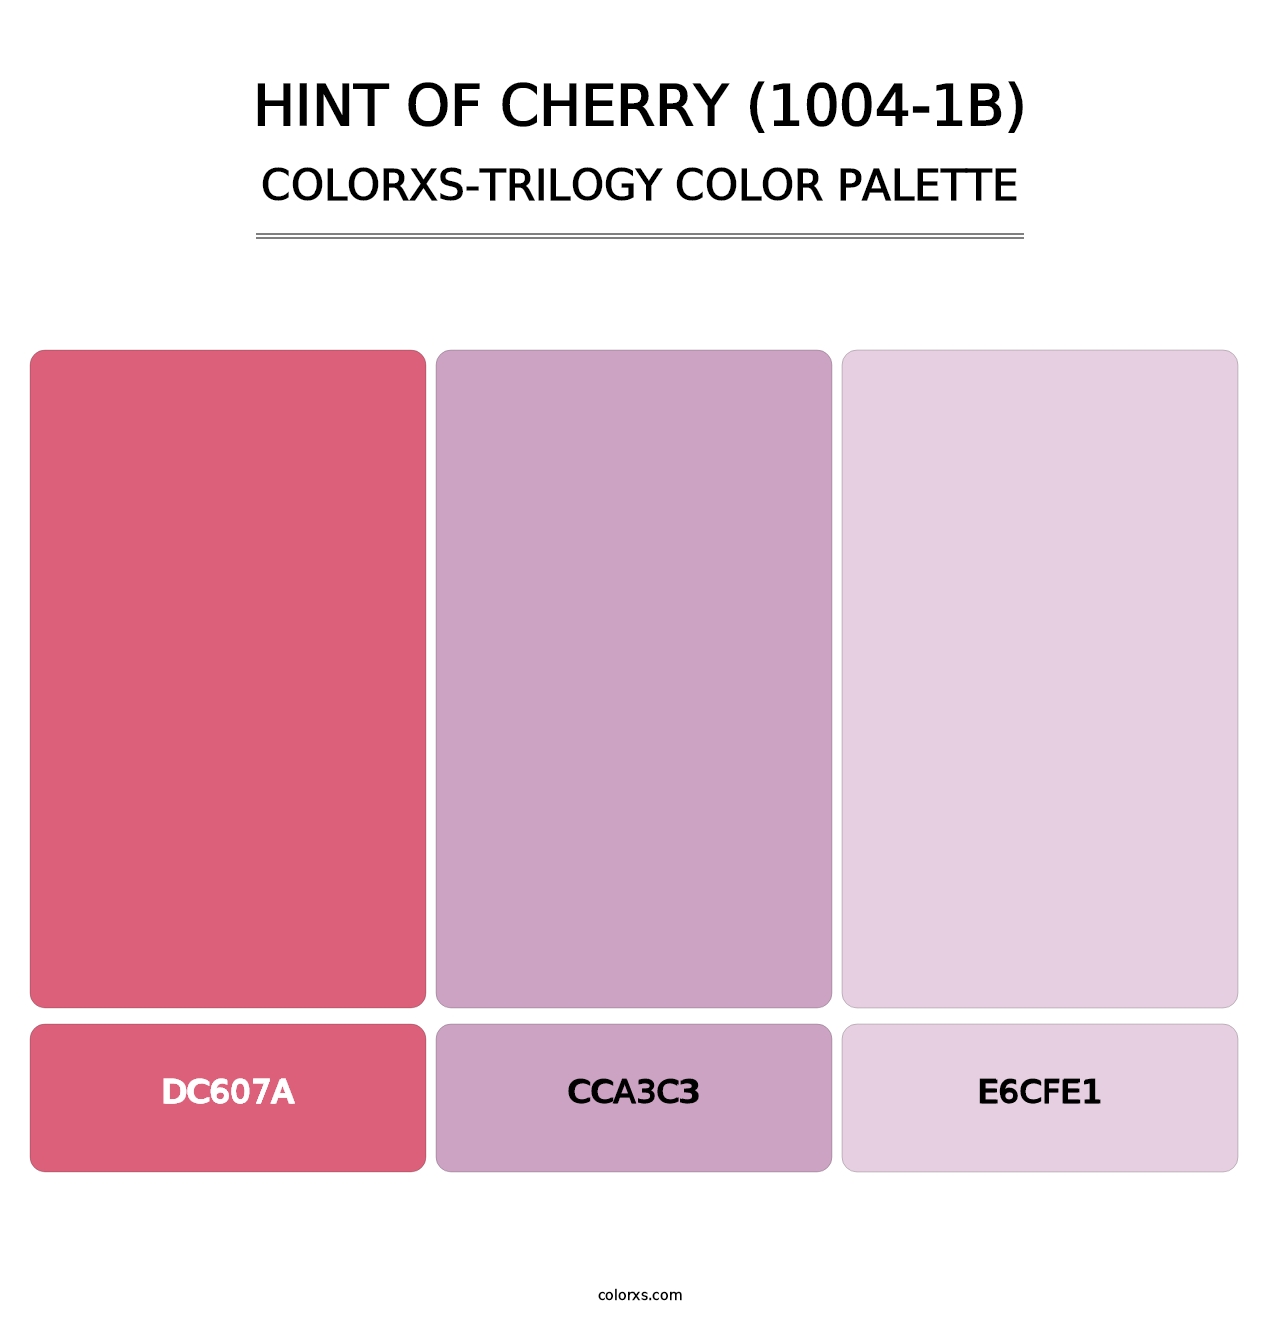 Hint of Cherry (1004-1B) - Colorxs Trilogy Palette